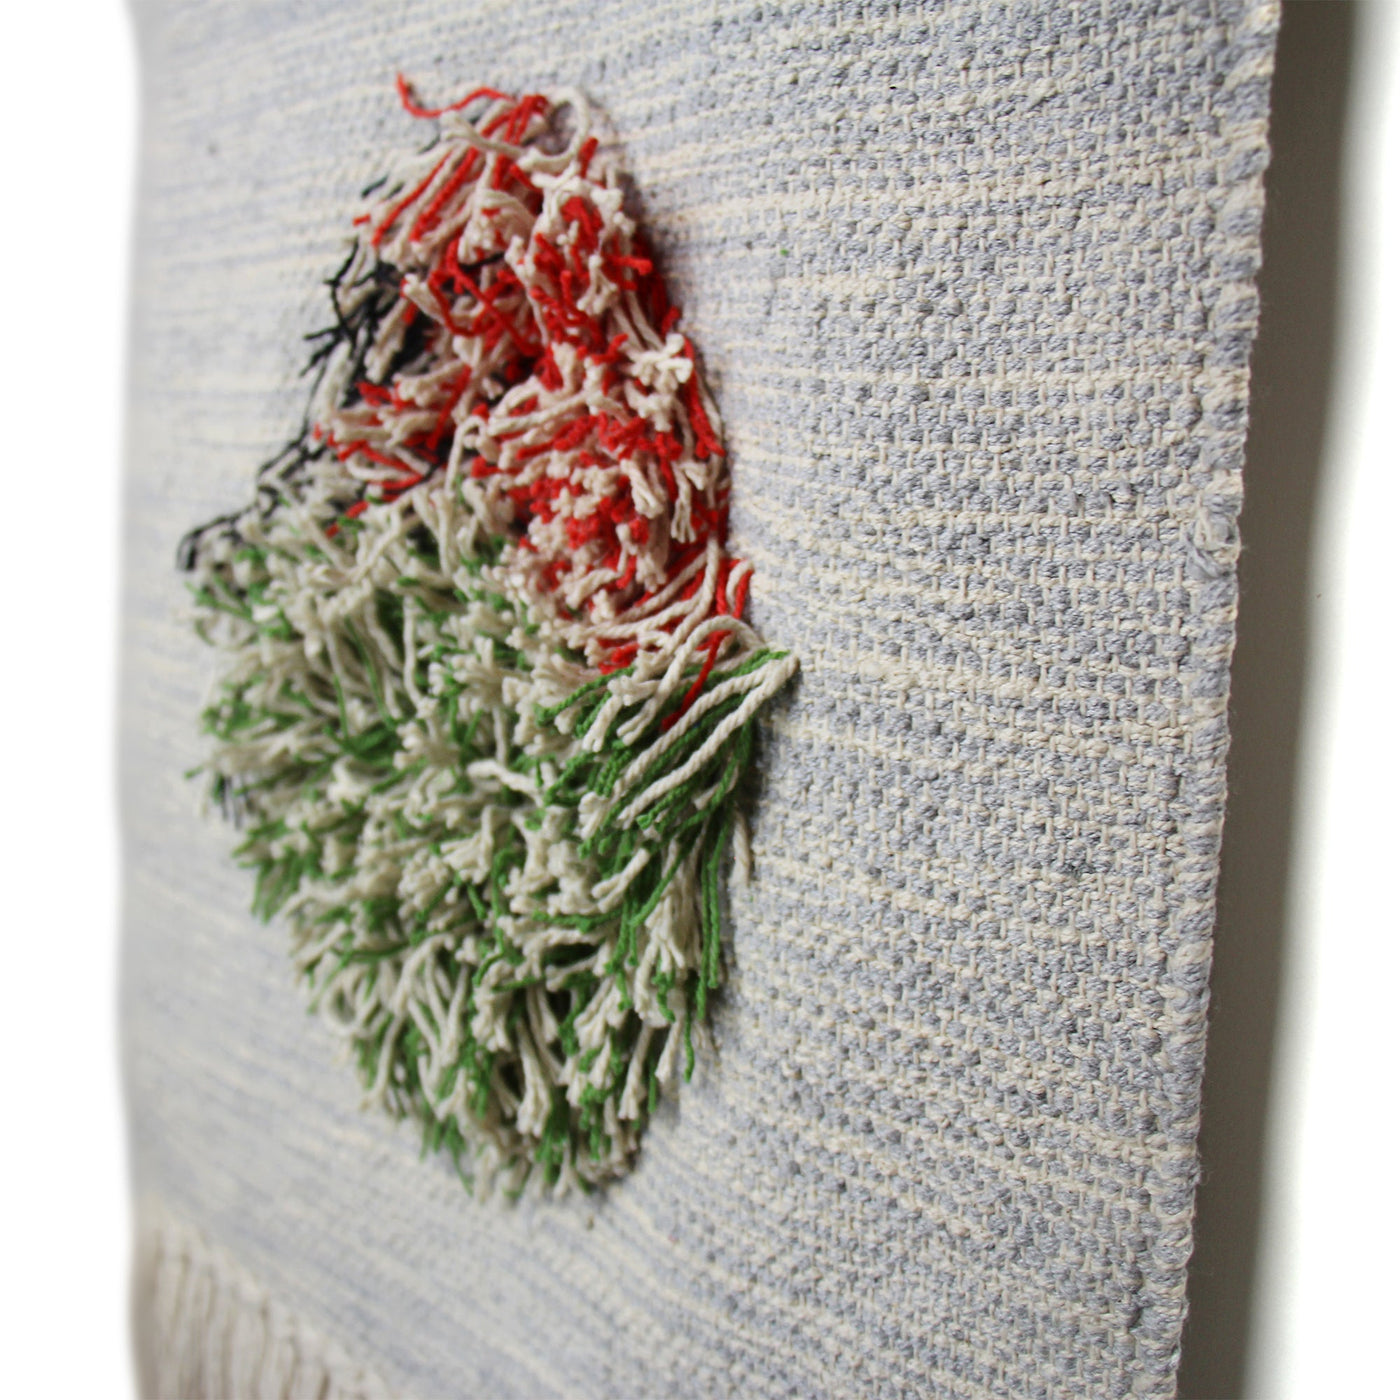 Handwoven Boho Wall Hanging, Neutral with Pop of Color